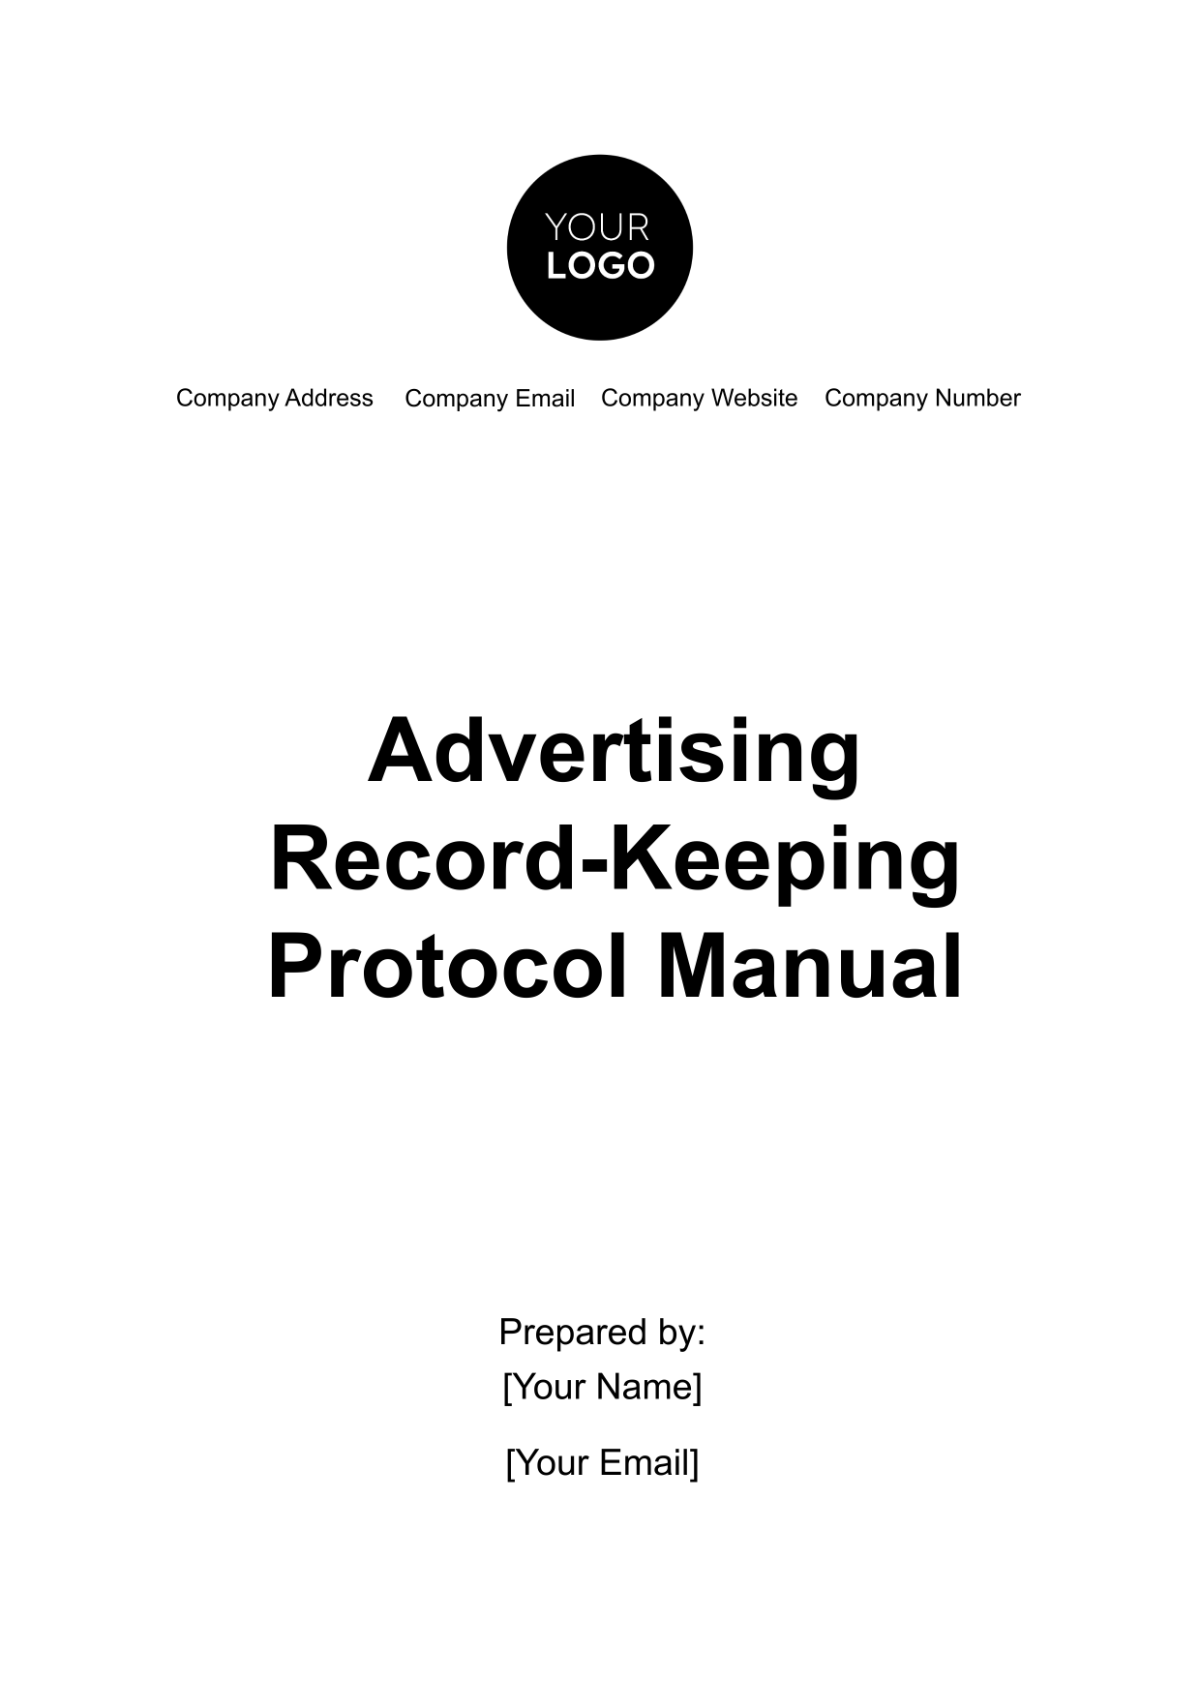 Advertising Record-Keeping Protocol Manual Template